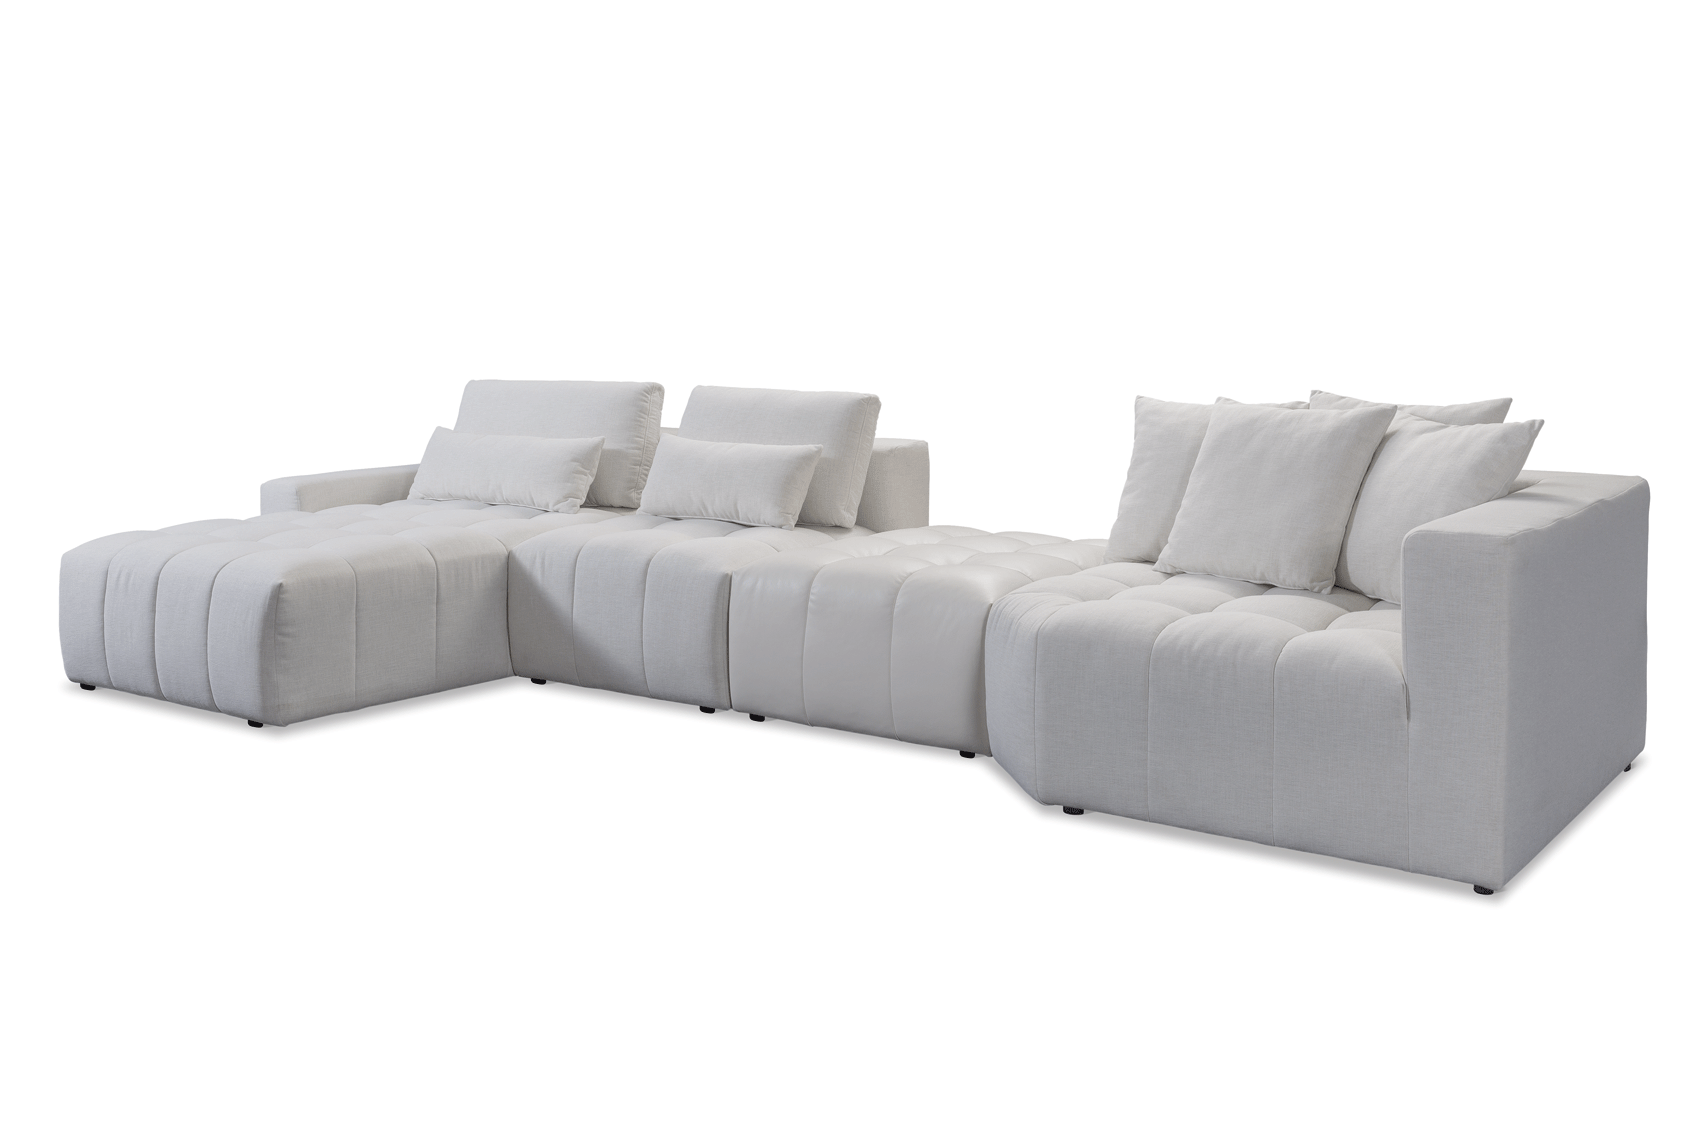 Brands Status Modern Collections, Italy Sense Sectional